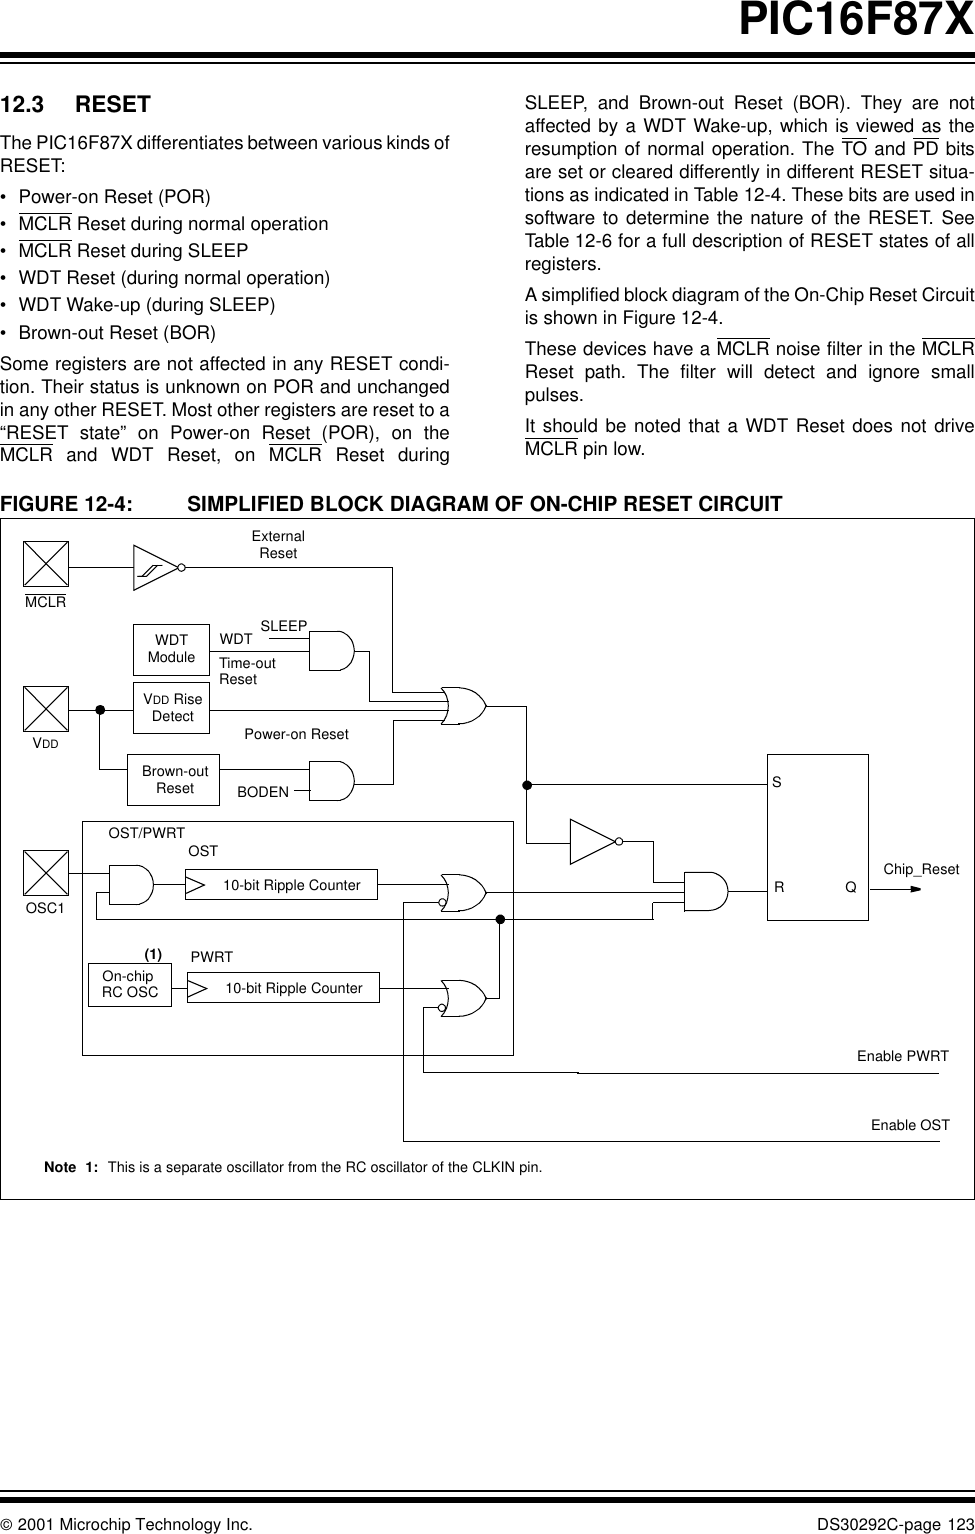  2001 Microchip Technology Inc. DS30292C-page 123PIC16F87X12.3 RESETThe PIC16F87X differentiates between various kinds ofRESET: •Power-on Reset (POR)•MCLR Reset during normal operation•MCLR Reset during SLEEP•WDT Reset (during normal operation)•WDT Wake-up (during SLEEP)•Brown-out Reset (BOR)Some registers are not affected in any RESET condi-tion. Their status is unknown on POR and unchangedin any other RESET. Most other registers are reset to a“RESET state” on Power-on Reset (POR), on theMCLR and WDT Reset, on MCLR Reset duringSLEEP, and Brown-out Reset (BOR). They are notaffected by a WDT Wake-up, which is viewed as theresumption of normal operation. The TO and PD bitsare set or cleared differently in different RESET situa-tions as indicated in Table 12-4. These bits are used insoftware to determine the nature of the RESET. SeeTable 12-6 for a full description of RESET states of allregisters.A simplified block diagram of the On-Chip Reset Circuitis shown in Figure 12-4.These devices have a MCLR noise filter in the MCLRReset path. The filter will detect and ignore smallpulses.It should be noted that a WDT Reset does not driveMCLR pin low.FIGURE 12-4: SIMPLIFIED BLOCK DIAGRAM OF ON-CHIP RESET CIRCUITSRQExternalResetMCLRVDDOSC1WDTModuleVDD RiseDetectOST/PWRTOn-chip RC OSC WDTTime-outPower-on ResetOST10-bit Ripple CounterPWRTChip_Reset10-bit Ripple CounterResetEnable OSTEnable PWRTSLEEPNote 1: This is a separate oscillator from the RC oscillator of the CLKIN pin.Brown-outReset BODEN(1)